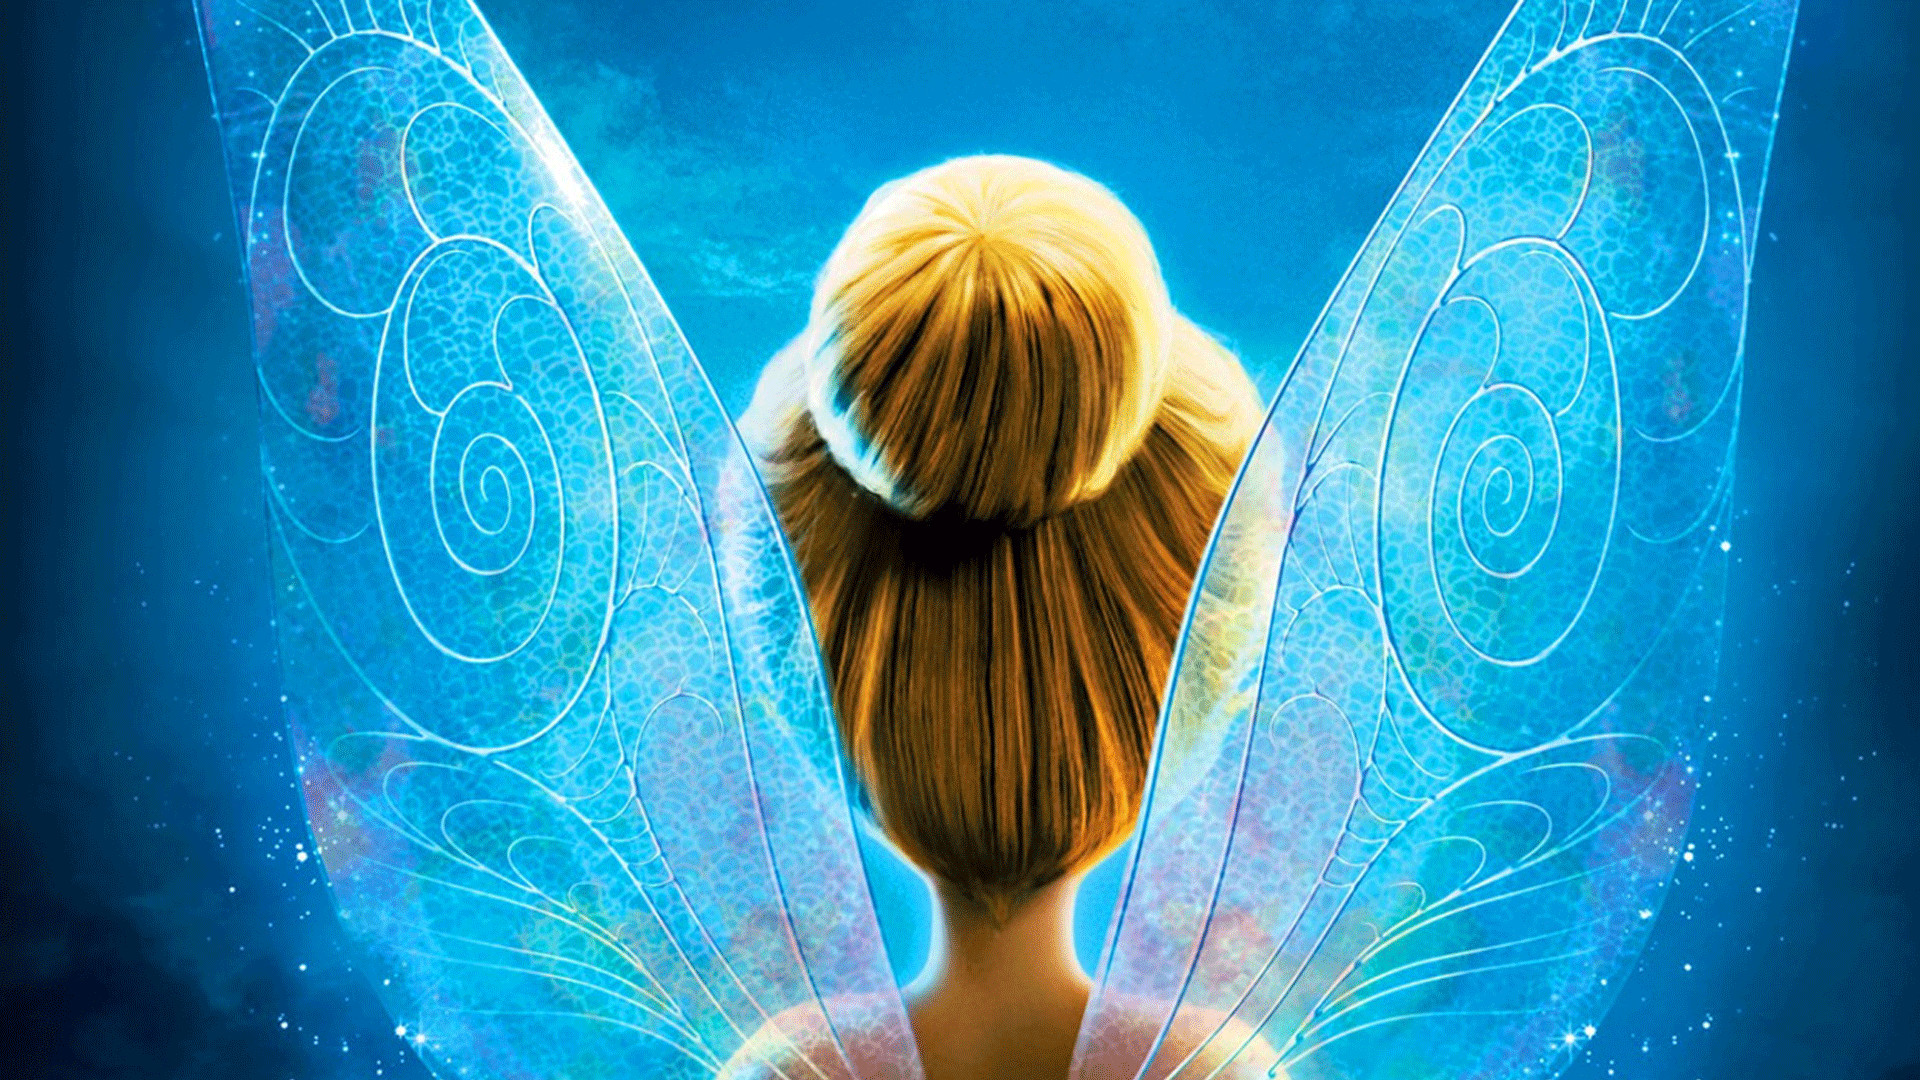 1920x1080 Tinker Bell And The Secret Of The Wings